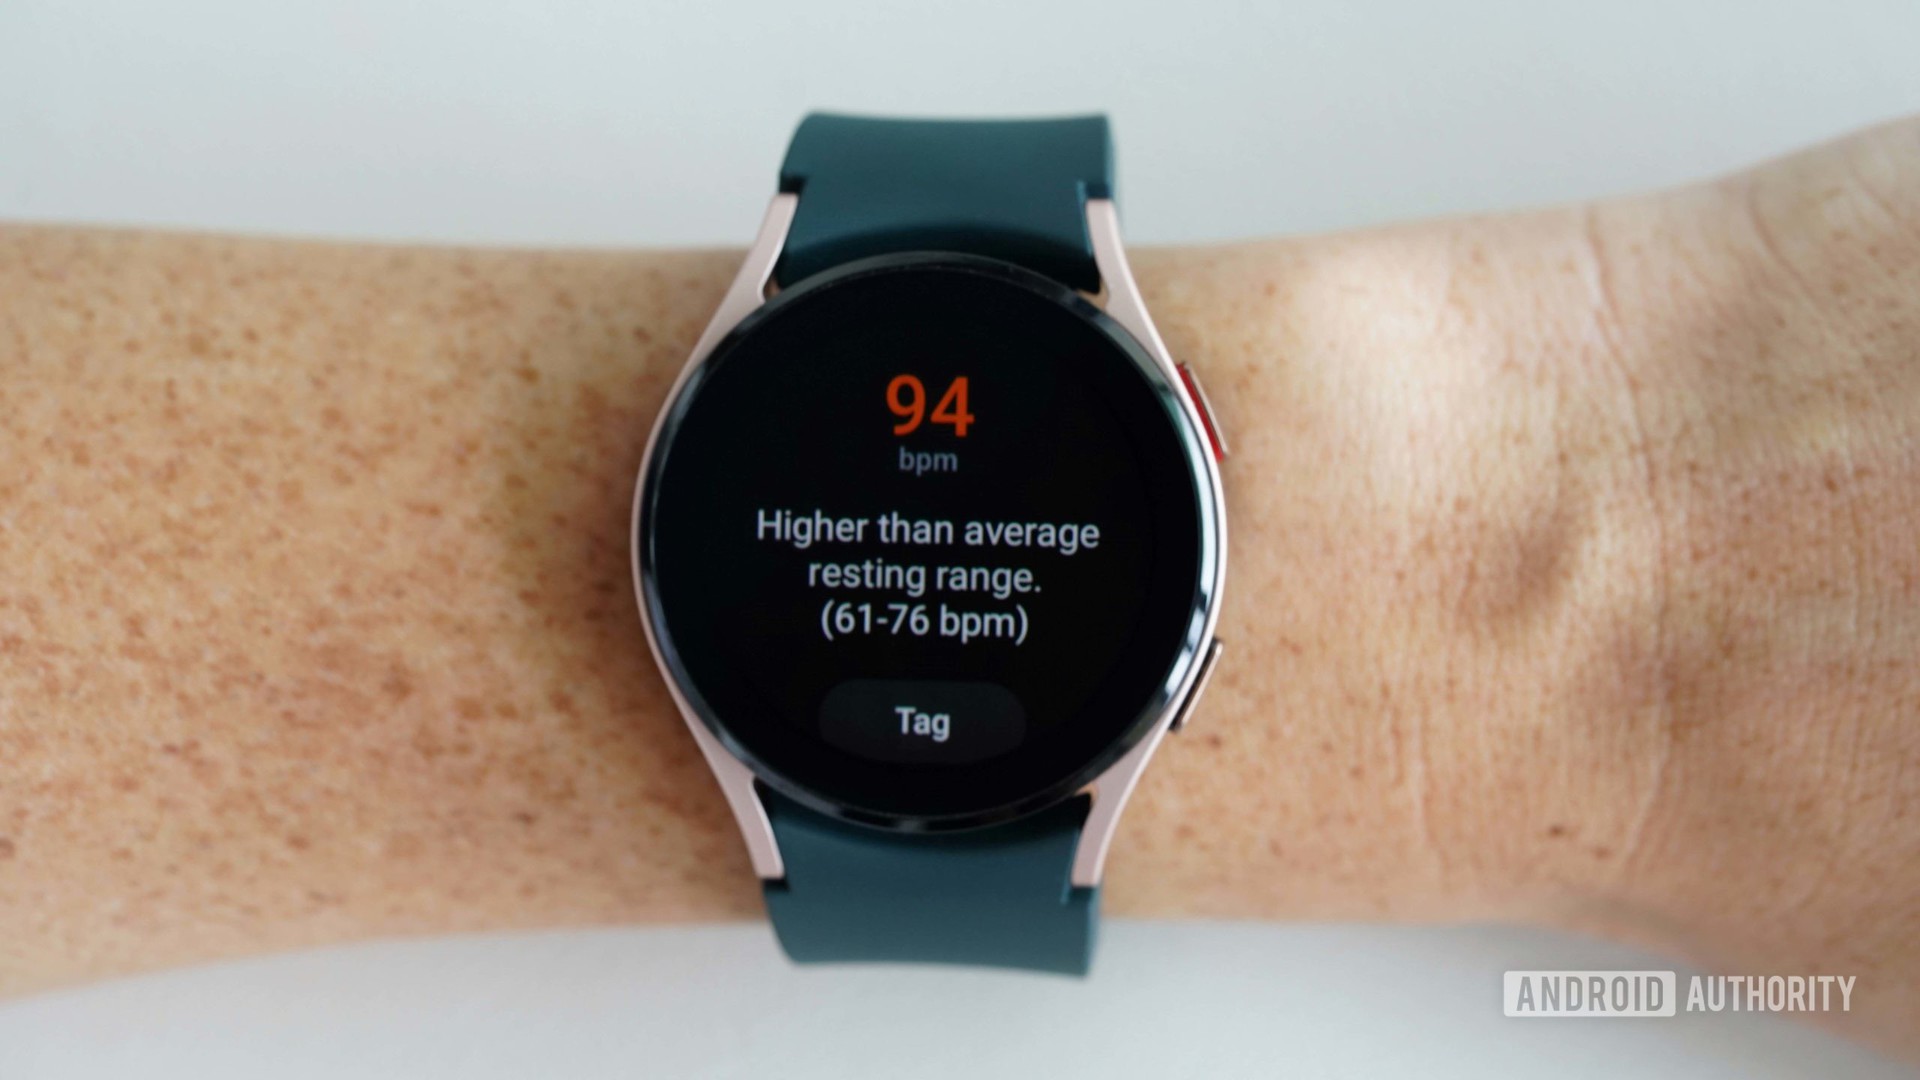 Samsung Heart rate tracker shows user has a higher than average resting heart rate. 